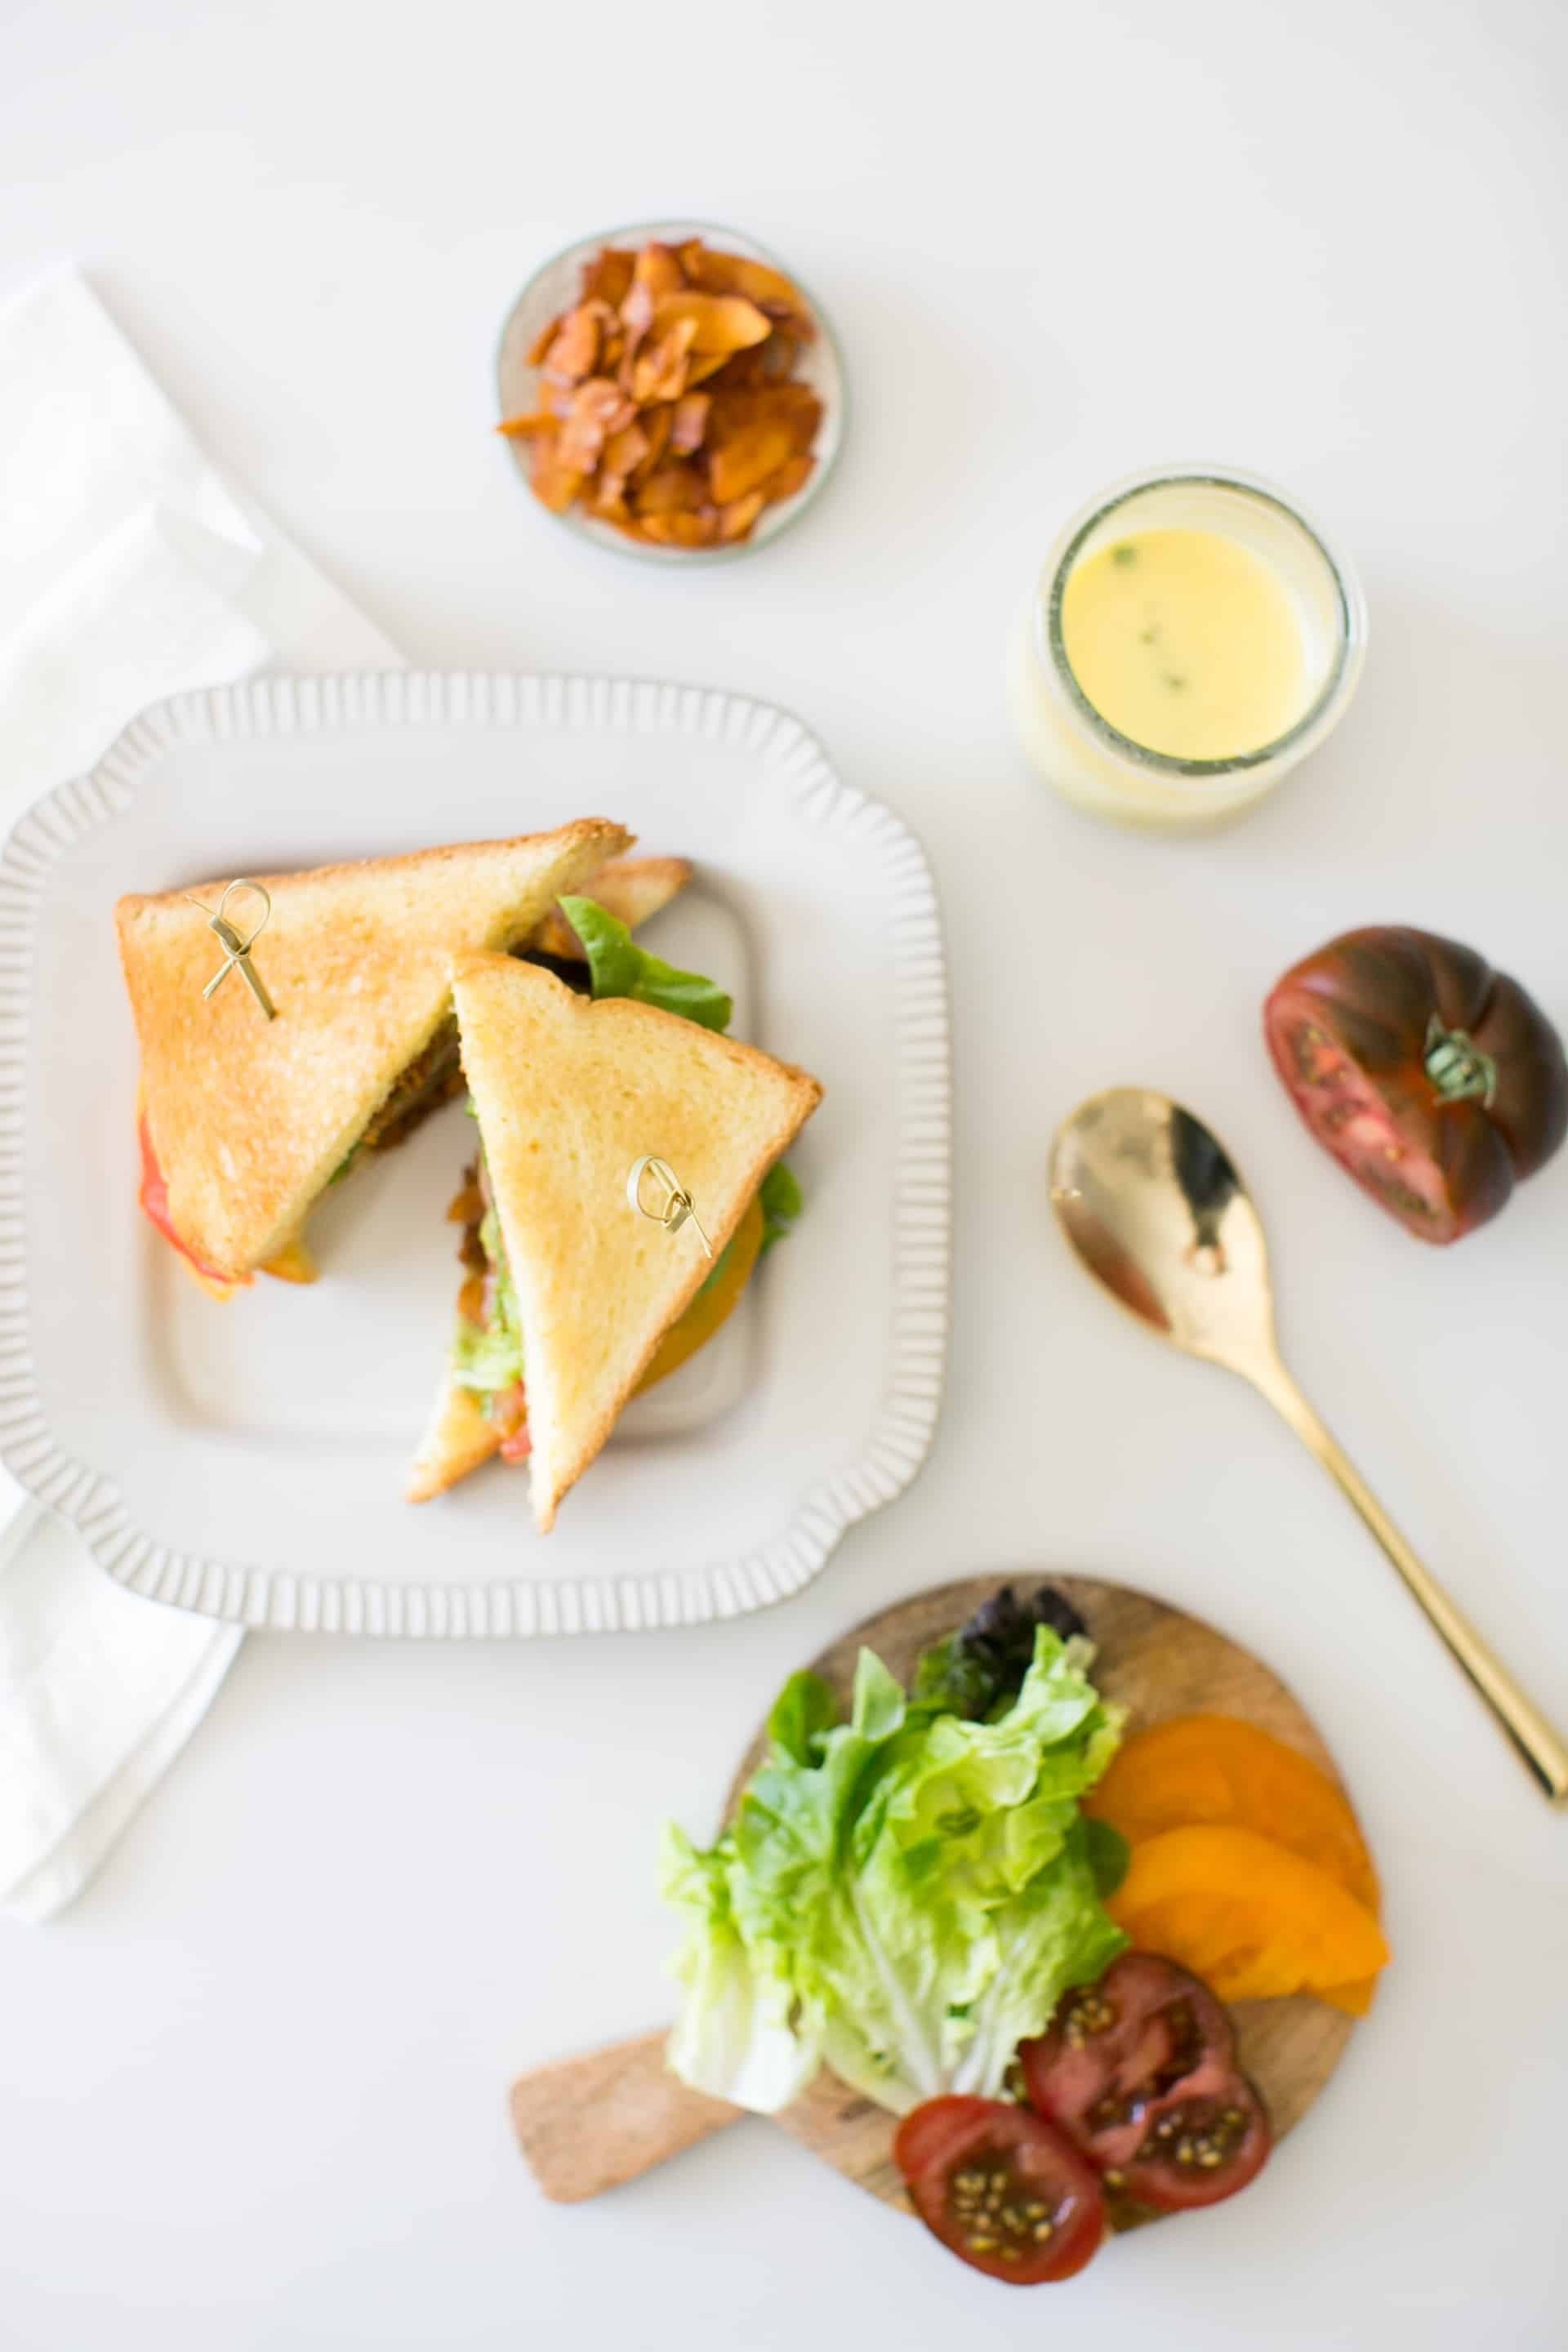 Use pre-made coconut bacon (or your favorite meat substitute) to make this soft-yet-crispy vegetarian BLT in no time. (via <strong><a href="https://helloglow.co/coconut-bacon-blt/">Hello Glow</a></strong>)